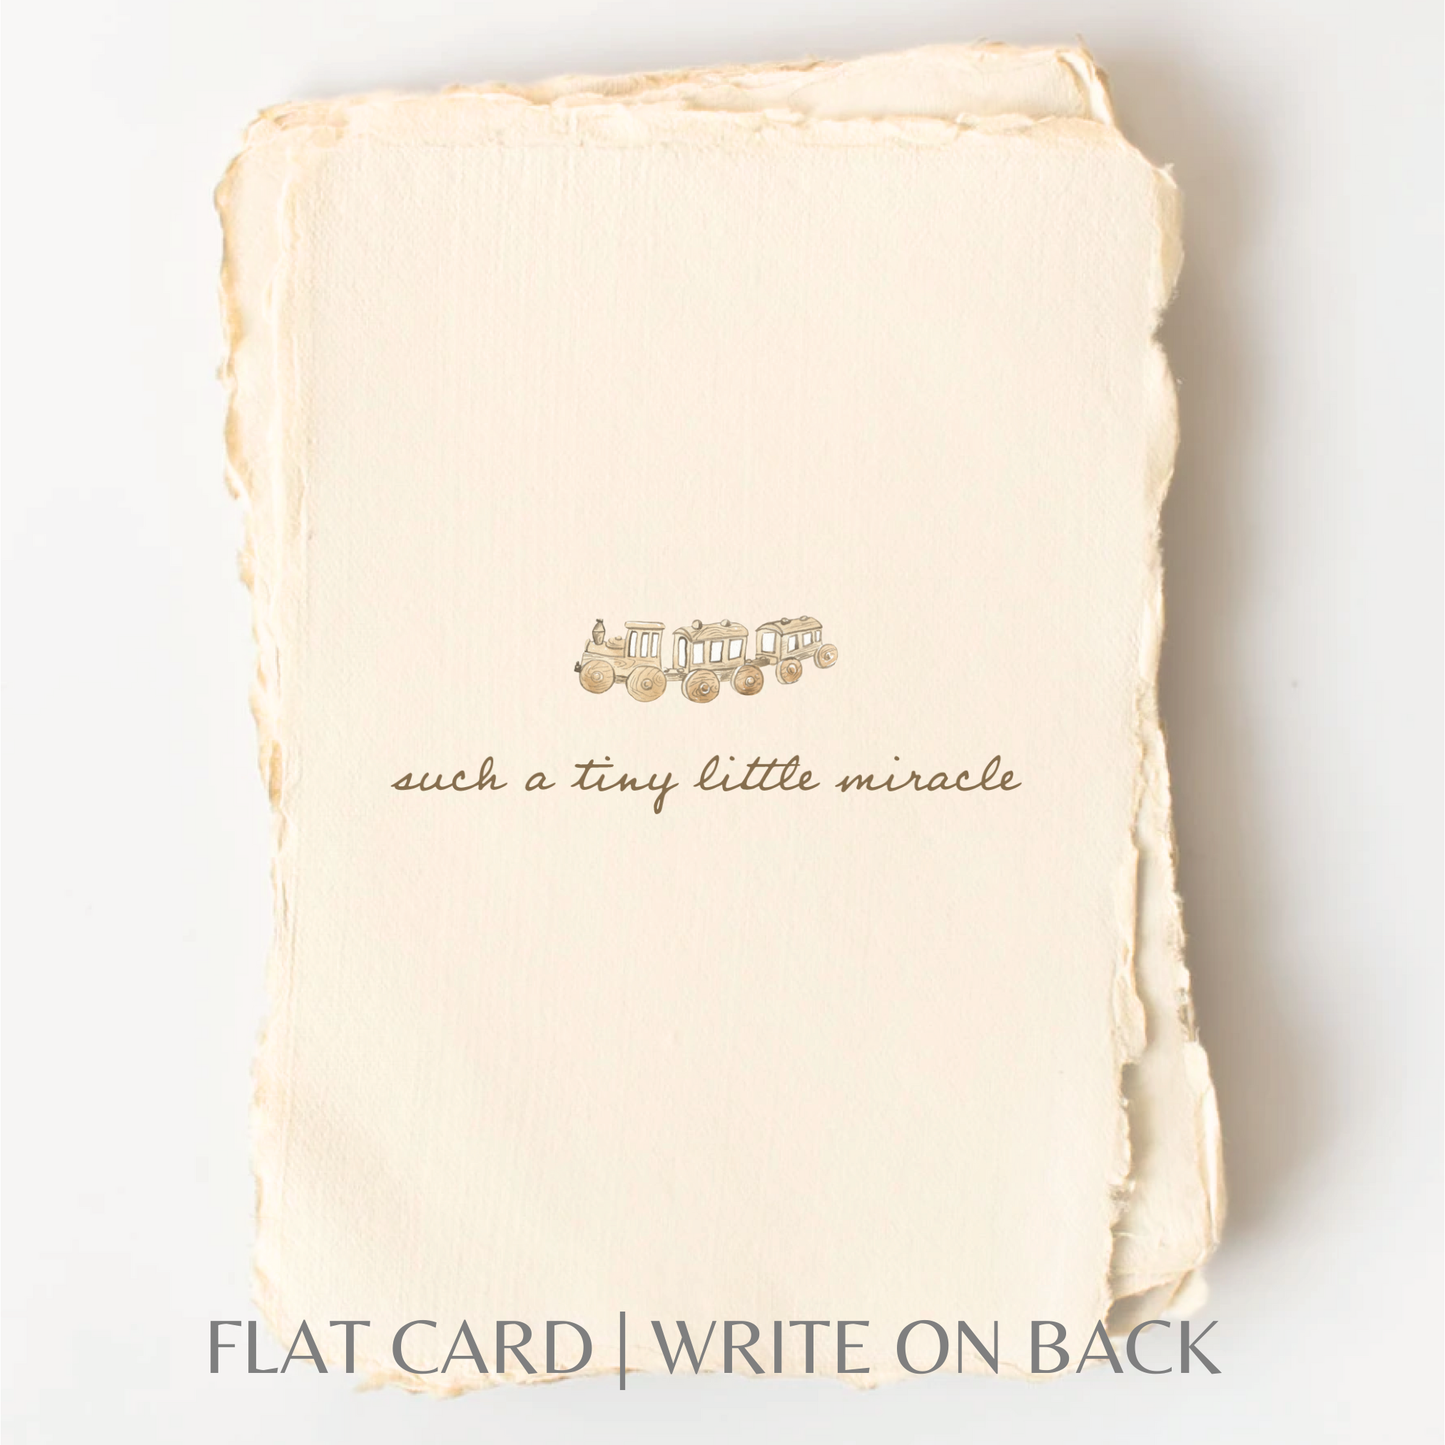 Paper Baristas - Tiny Miracle | Eco-Friendly Baby Shower Greeting Card